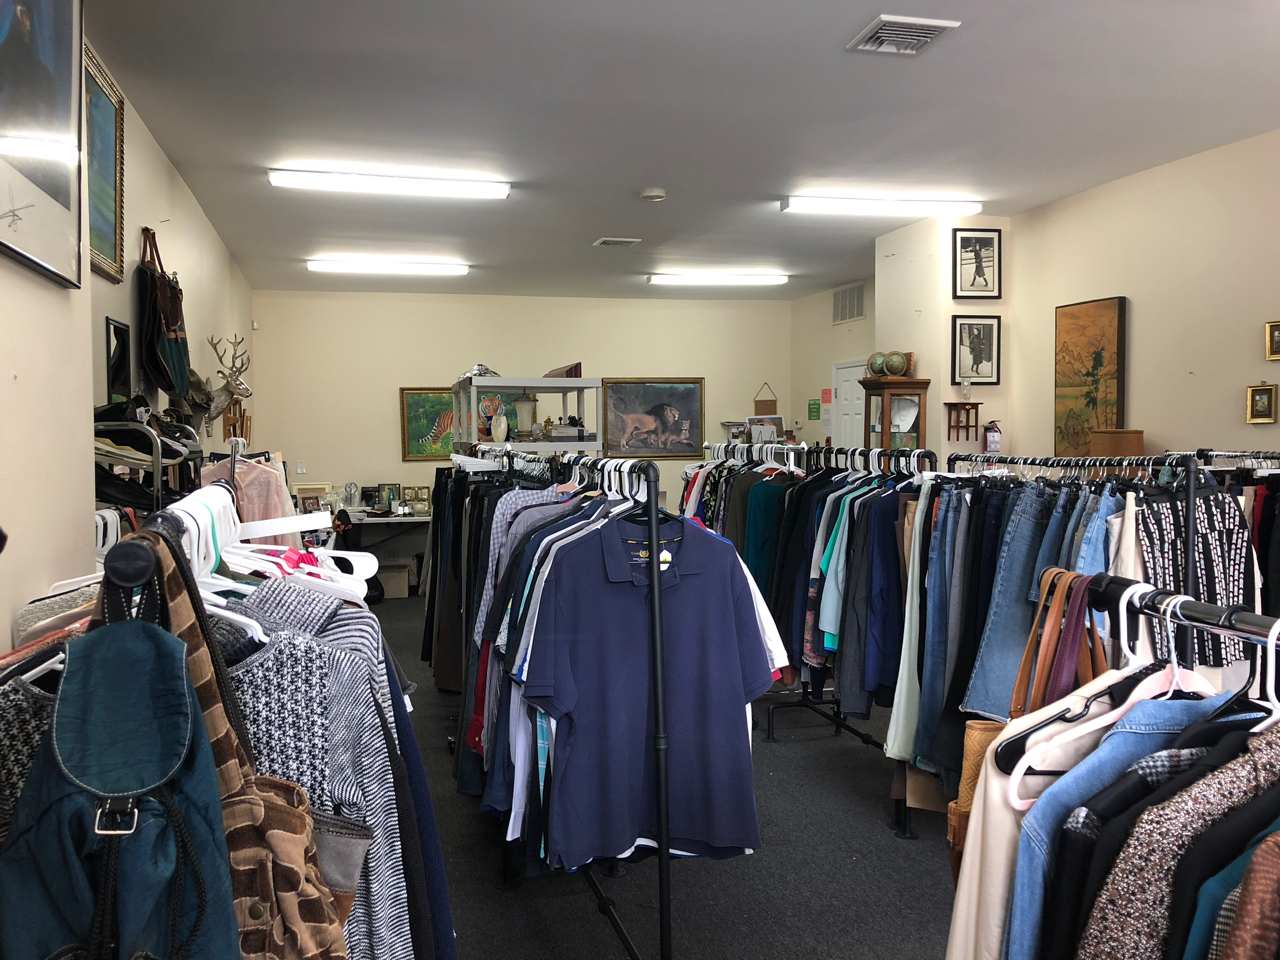 Relocated vintage clothing shop Vacation now open in North Beach